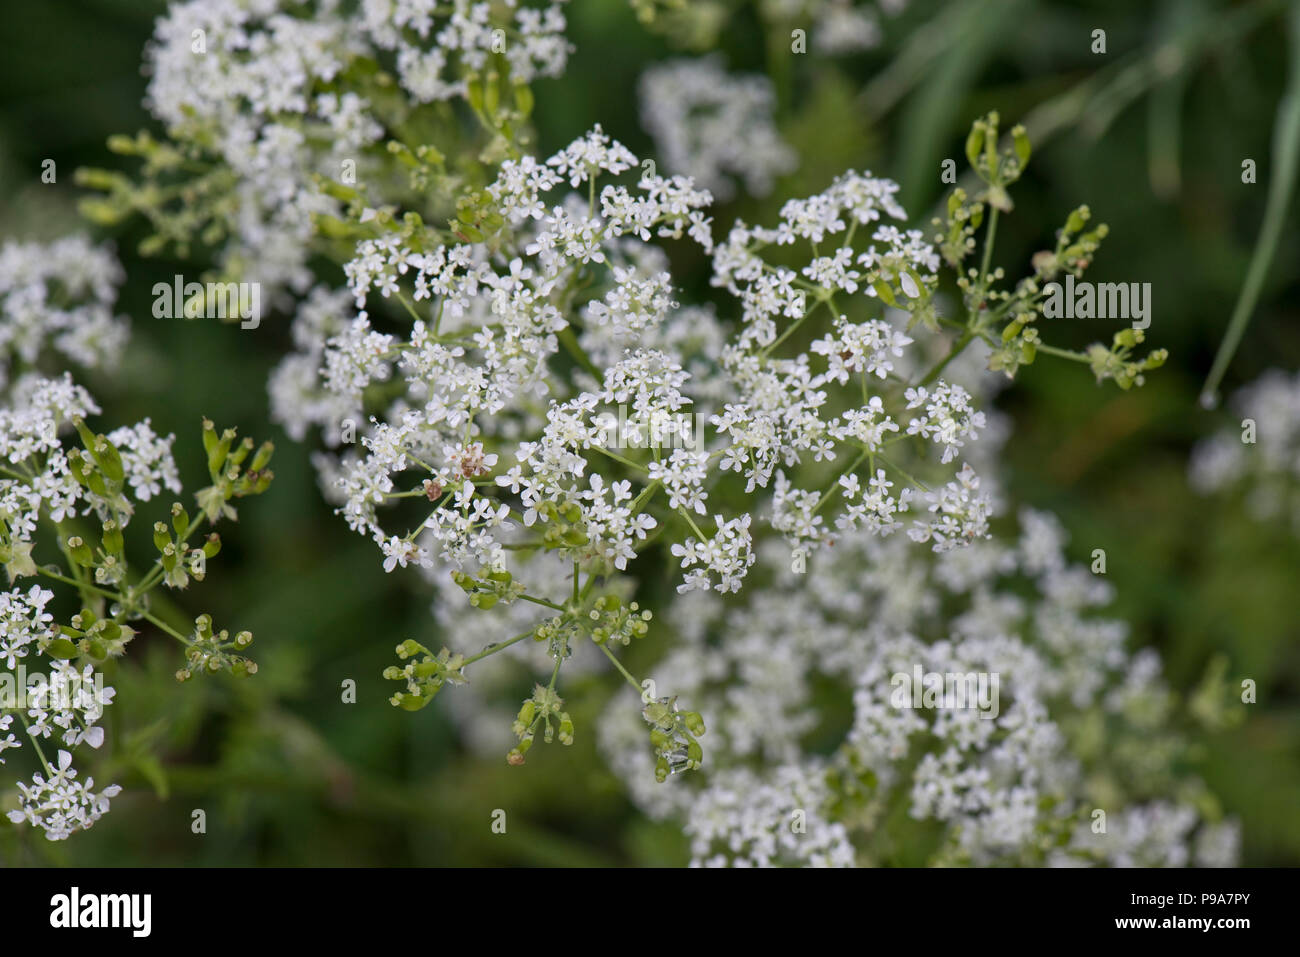 Flowering and seeding umbels of cow parsley, Anthriscus sylvestris, in spring, Berkshire, May Stock Photo